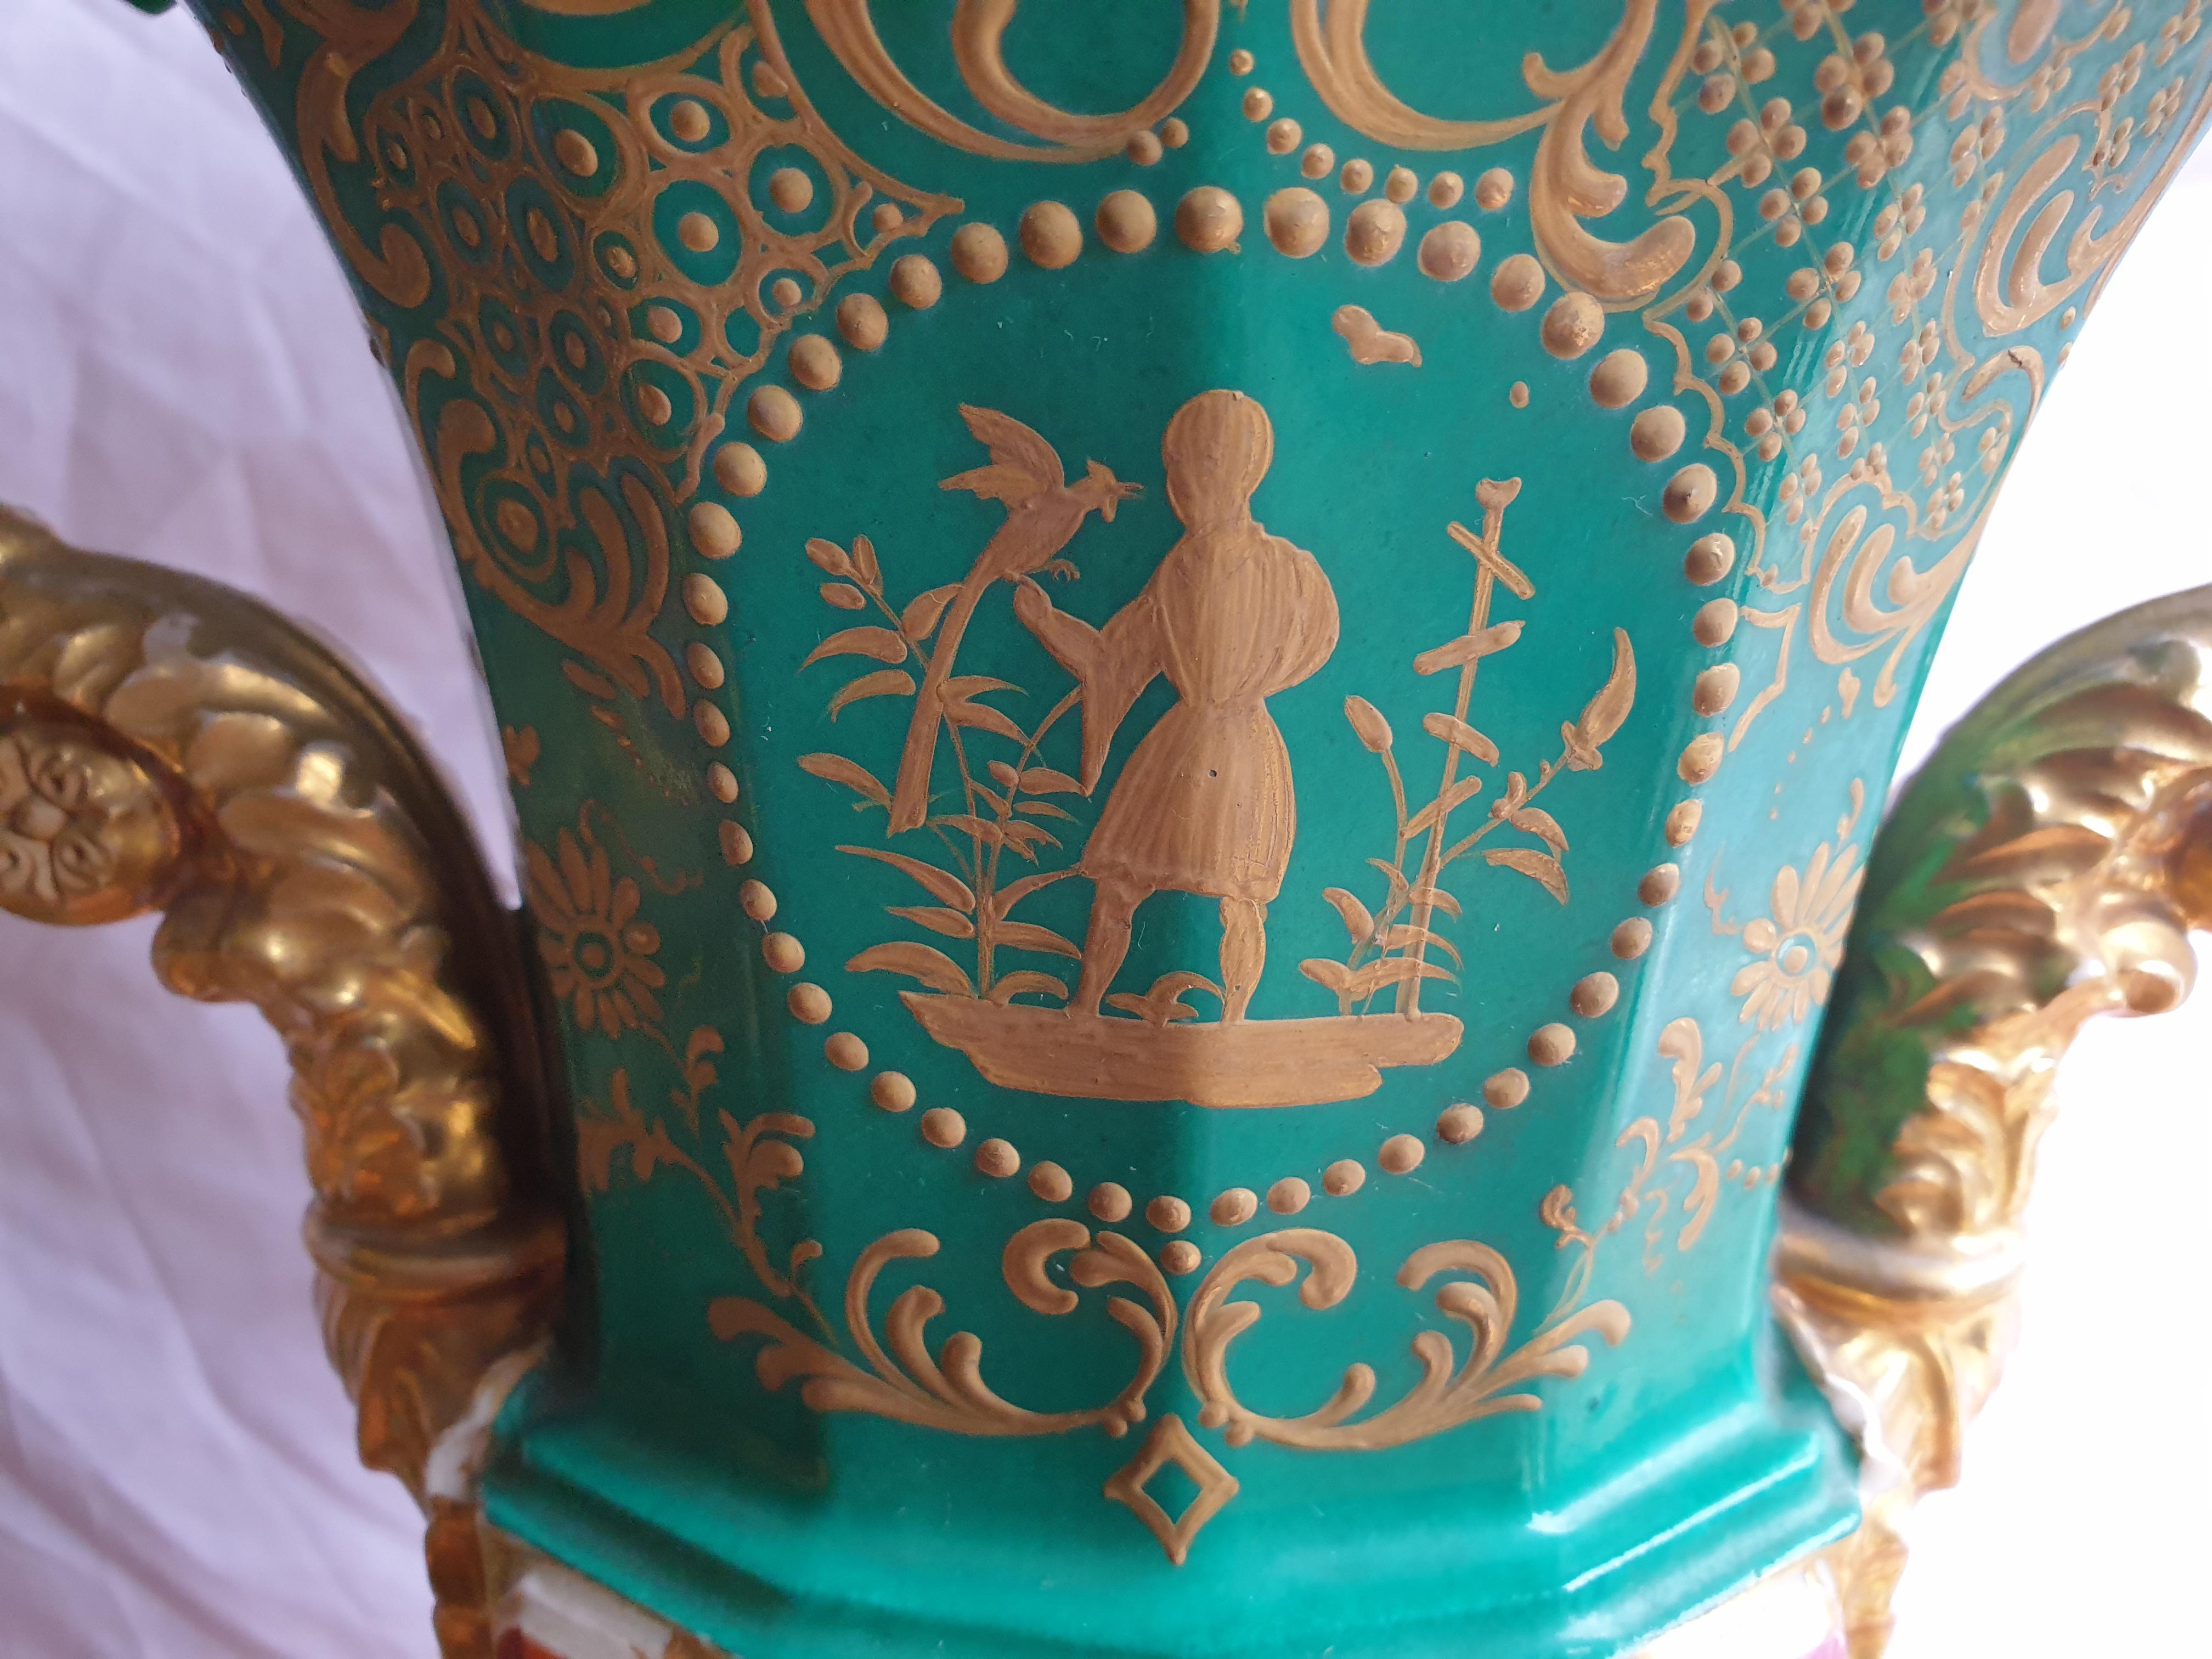 Jacob Petit Hand Painted Urn Vases with Gilding Detailing and Jewelling For Sale 10